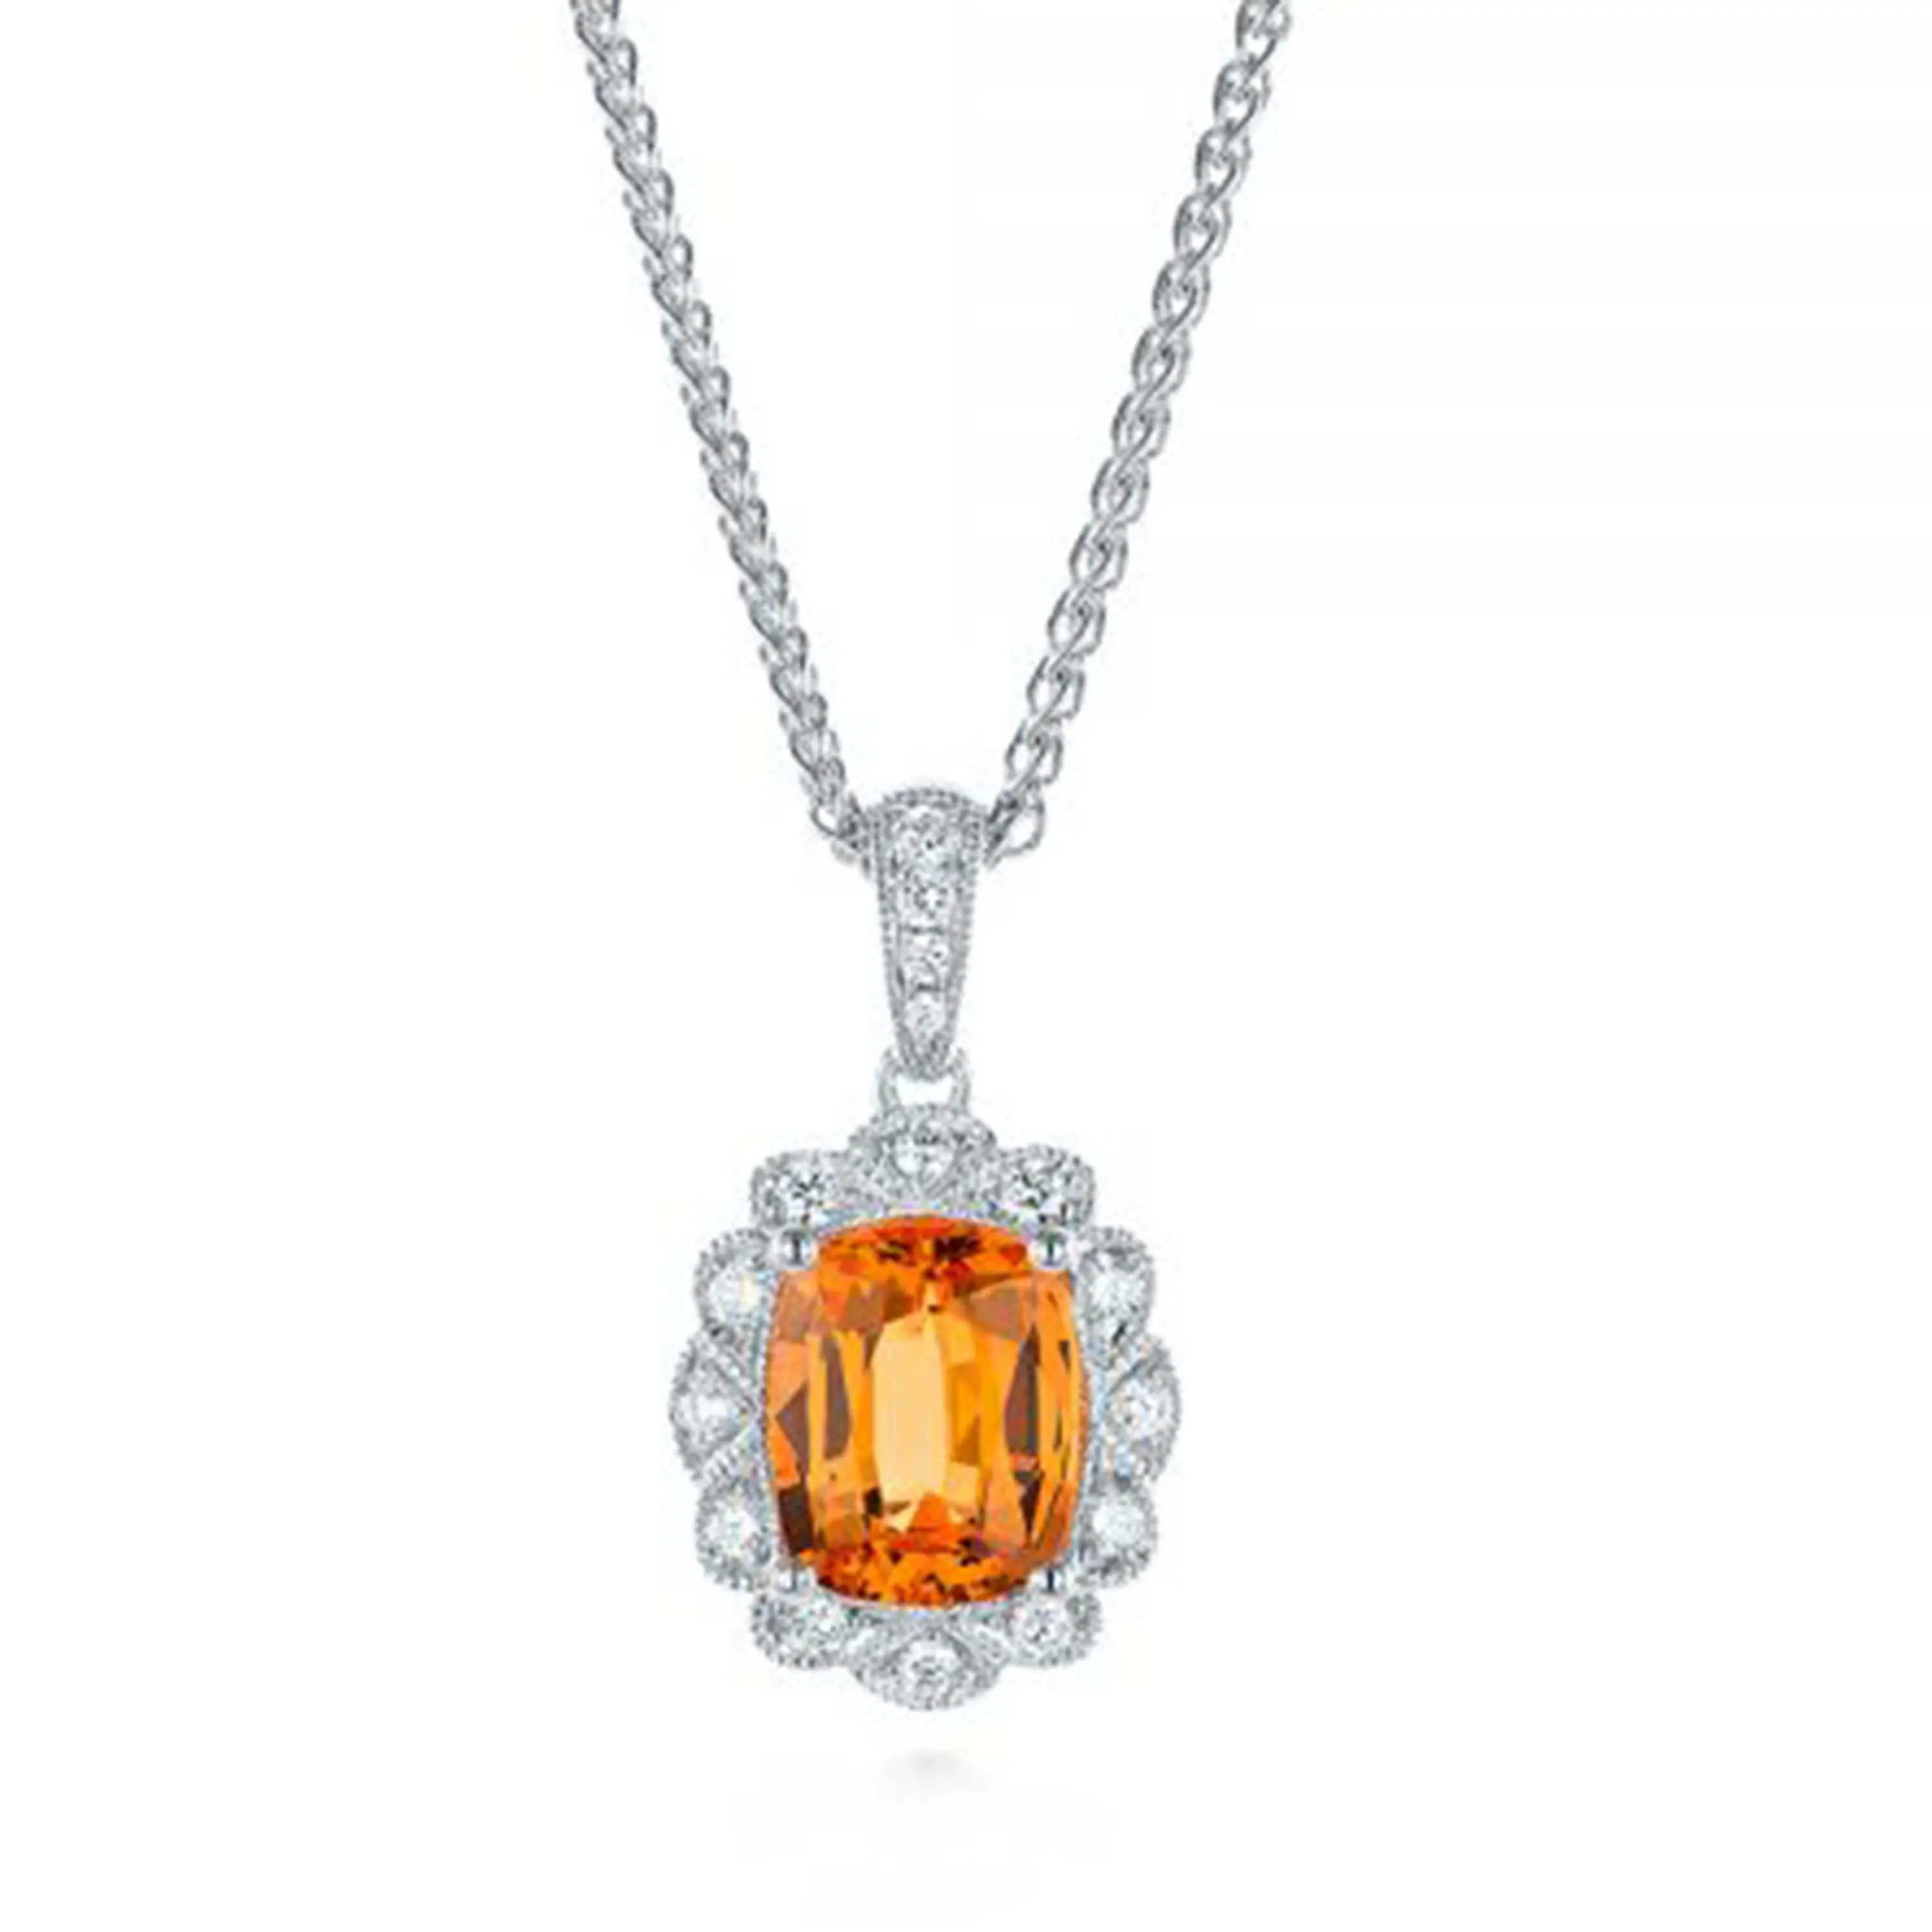 Wholesale 925 Sterling Silver White Zircon Halo With Orange Color Sapphire Pendant For Girls